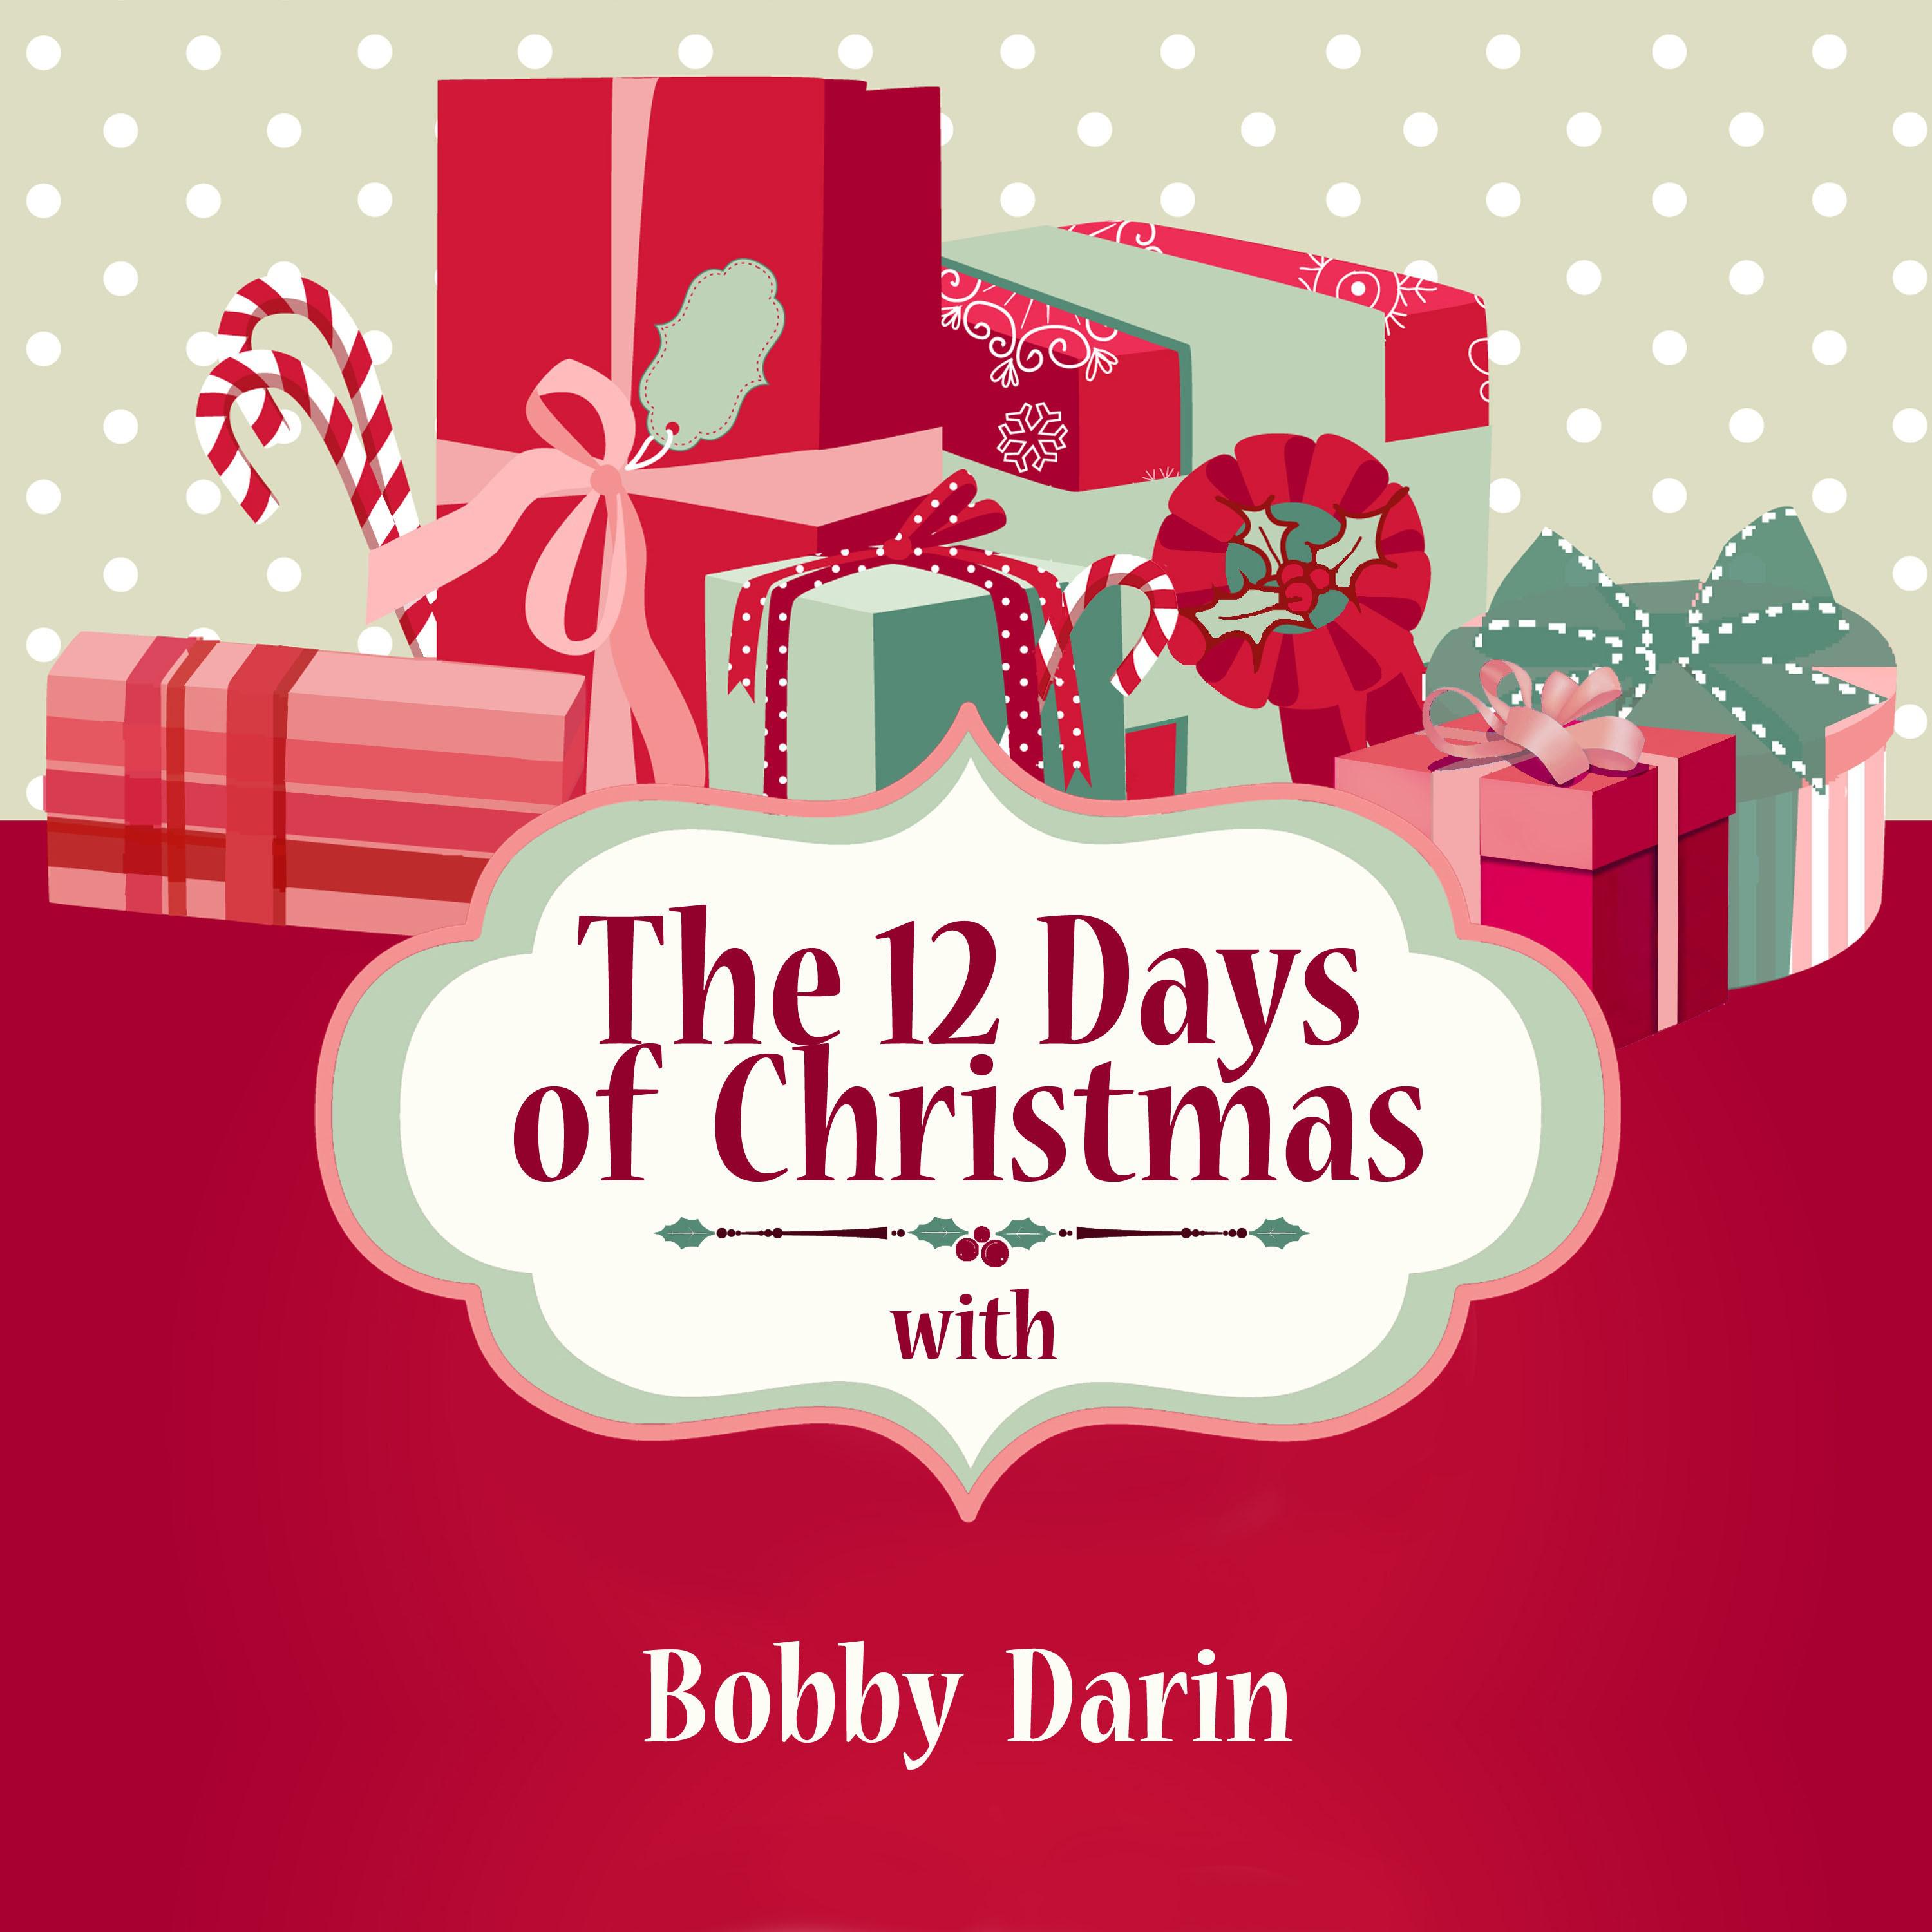 The 12 Days of Christmas with Bobby Darin